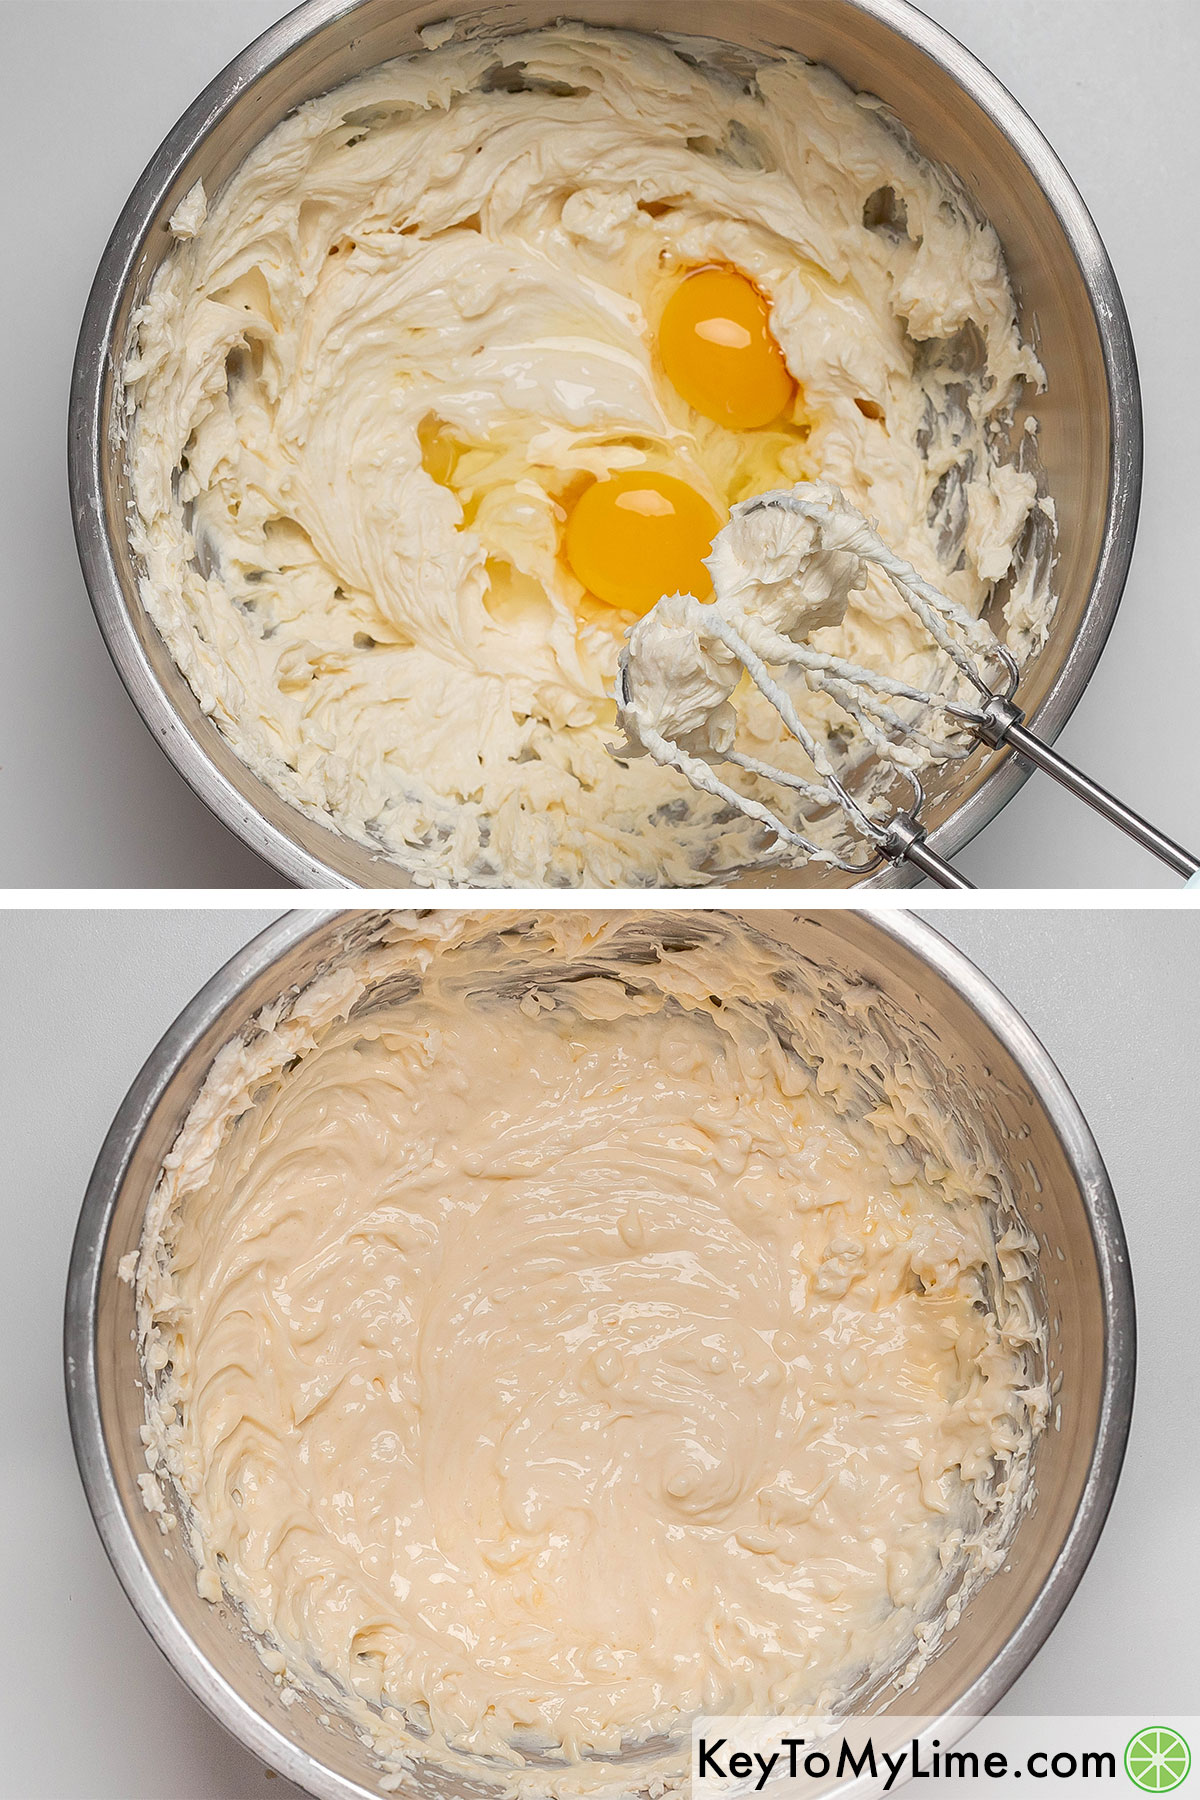 Adding the eggs to the batter in a large mixing bowl and beating until just combined.